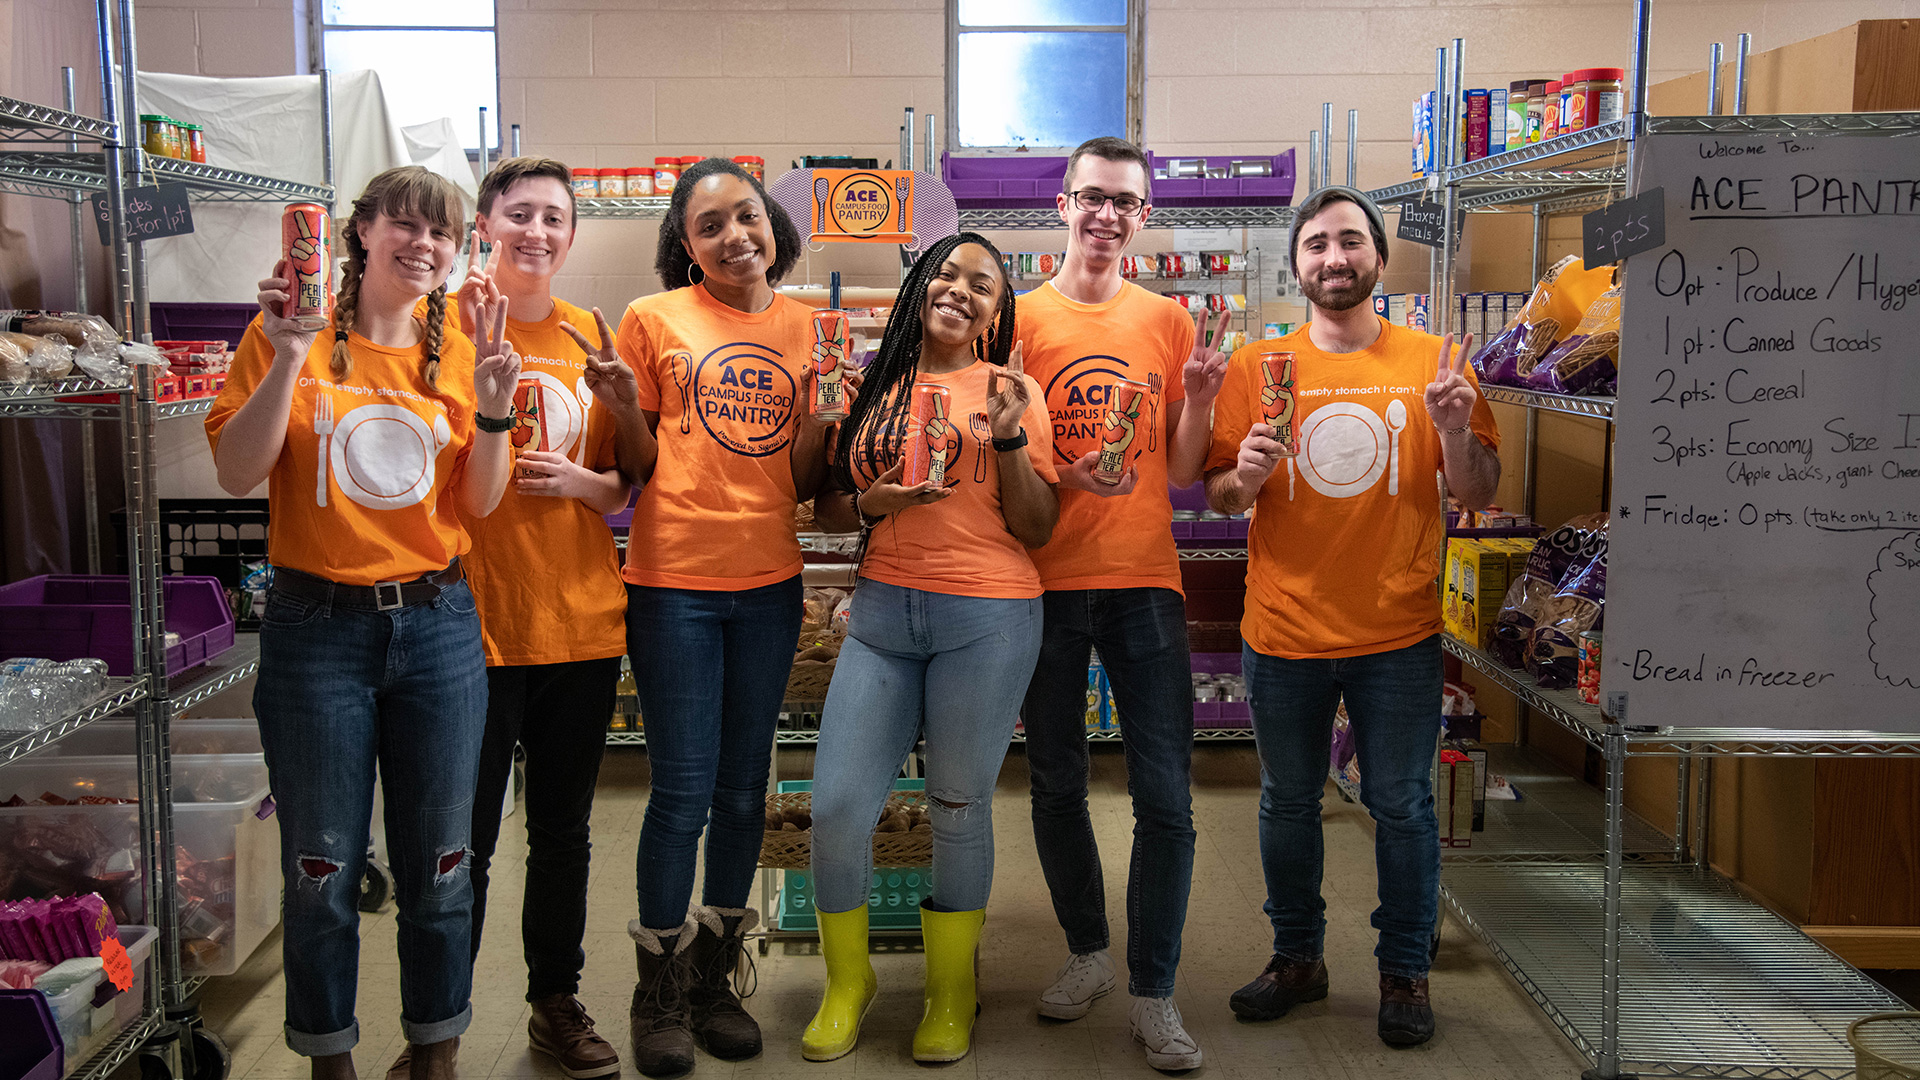 Student volunteers at the ACE Campus Food Pantry